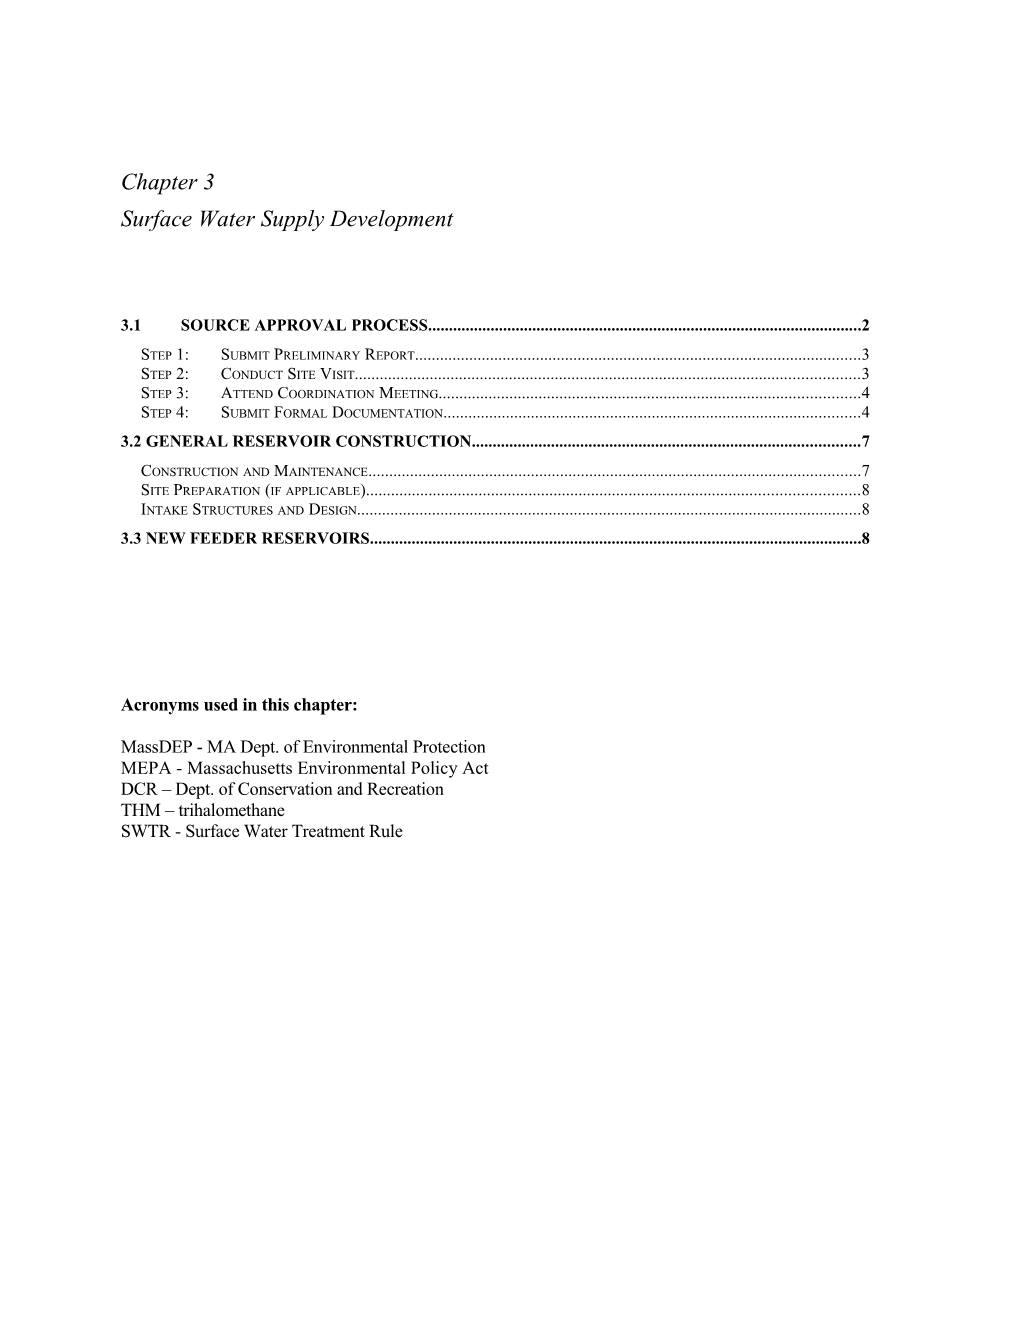 Chapter 3- Surface Water Supply Development